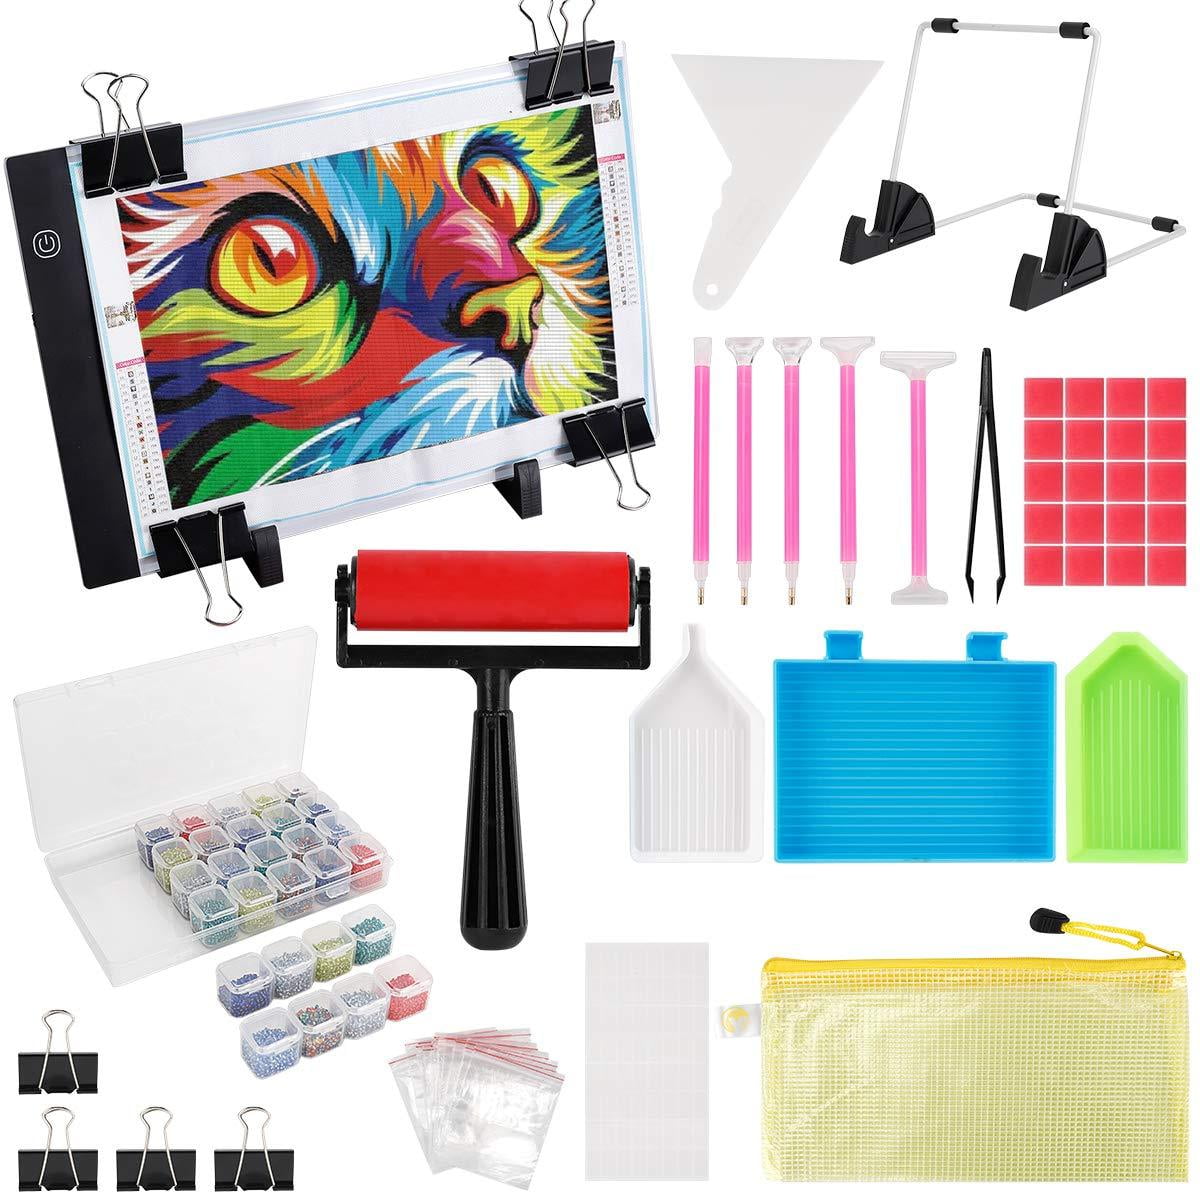 Diamond Painting A4 LED Light Pad Artcraft Tracing Light Box with Detachable Stand and Clips for 5D Diamond Painting/Tattoo Drawing/Sketching/Animation Adjustable USB Powered Light Board Kit